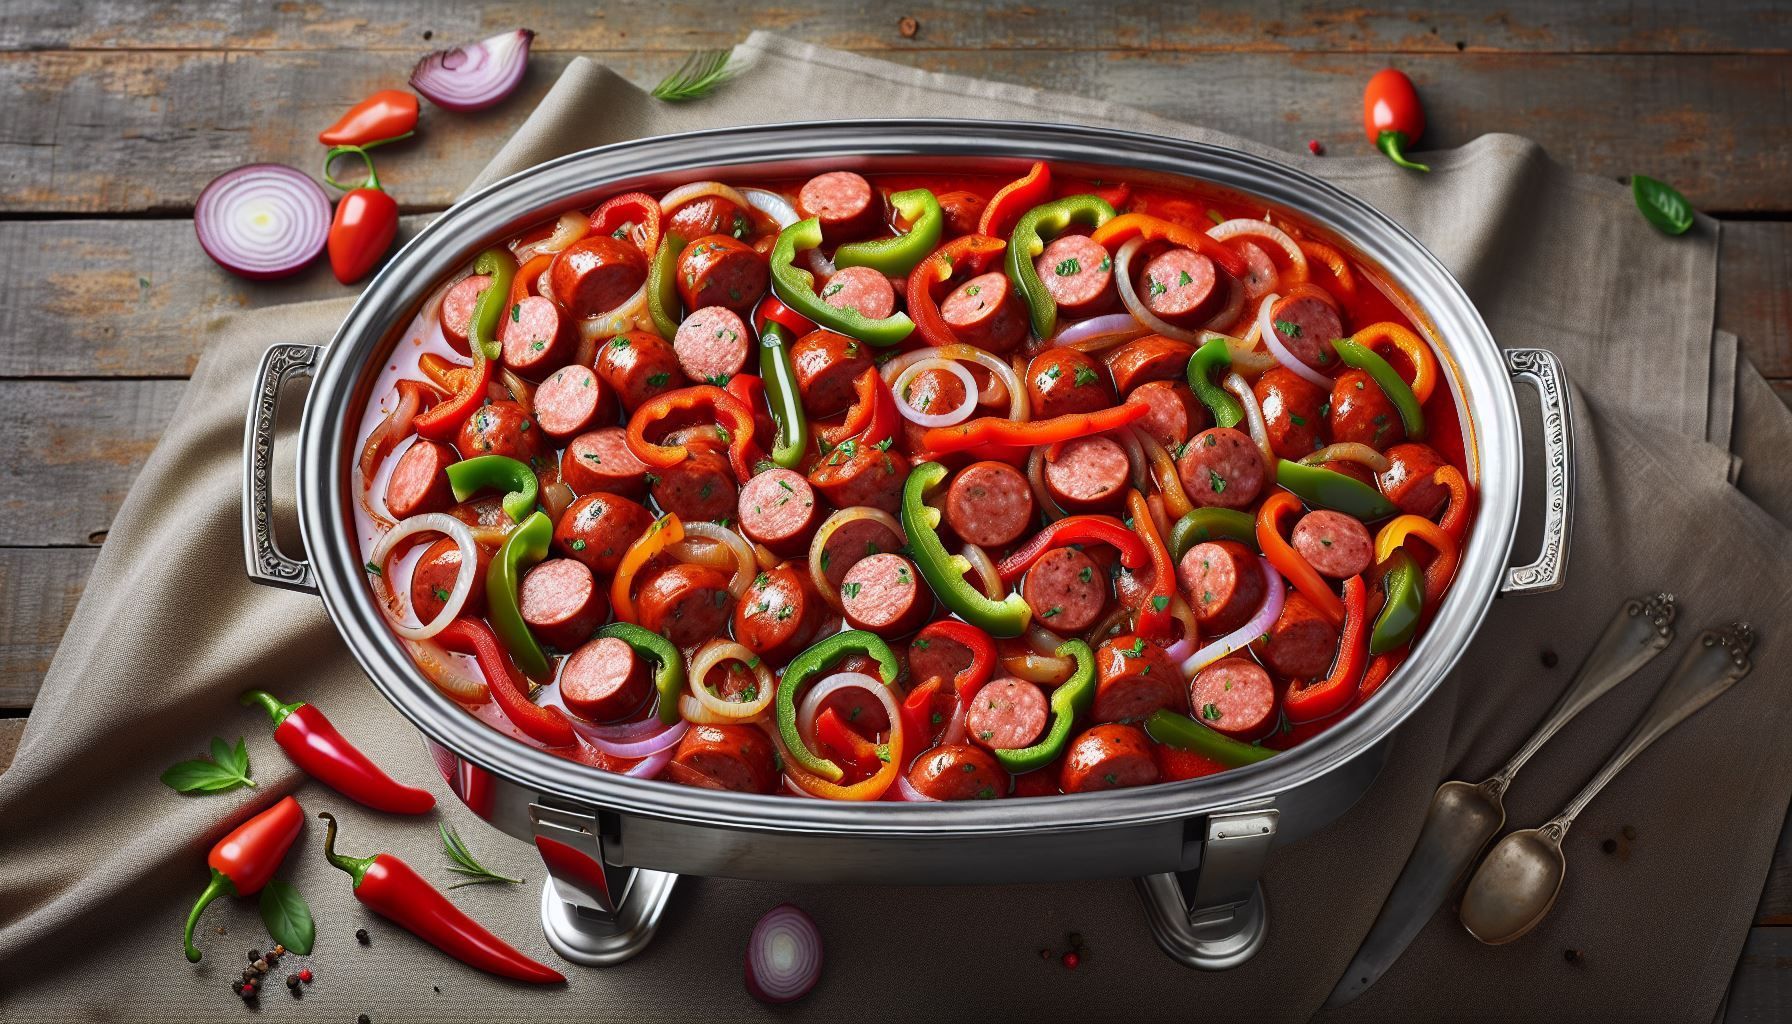 A casserole dish filled with sausage , peppers , onions and other vegetables.